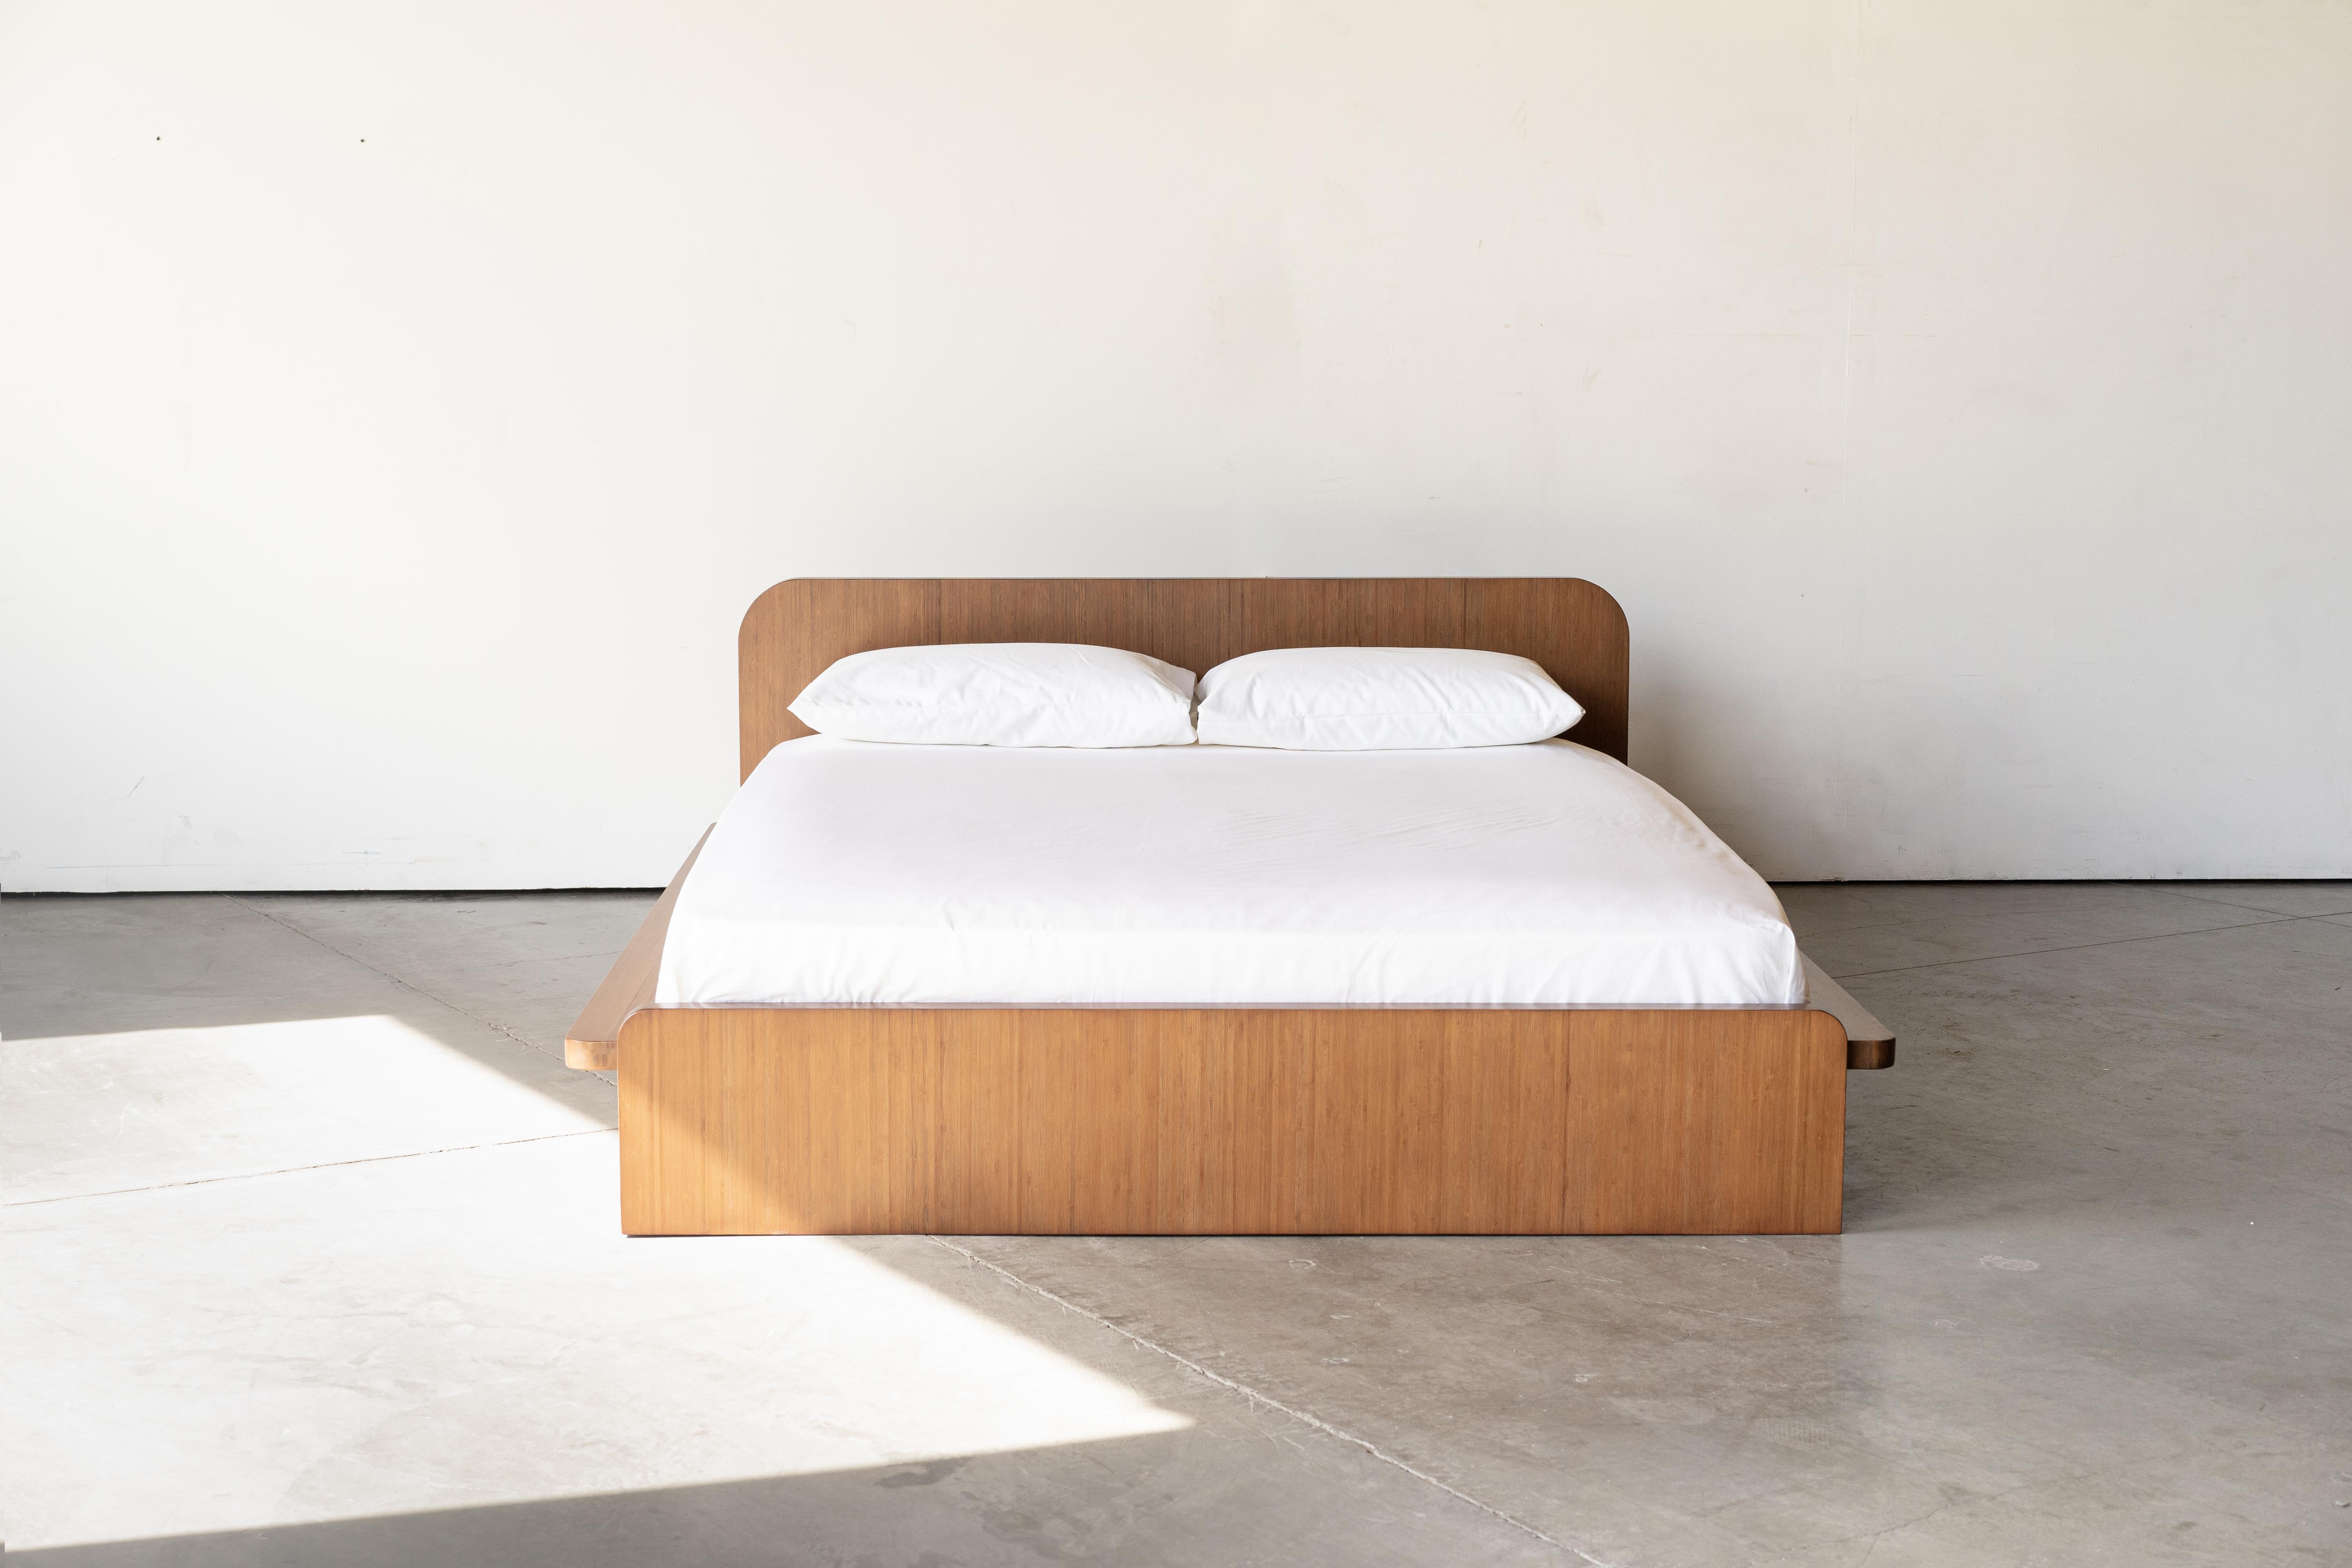 Sun at six is a contemporary furniture design studio working with traditional Chinese joinery masters to handcraft our pieces using traditional joinery. Great furniture begins with quality materials: raw, sustainably sourced wood, our house-made